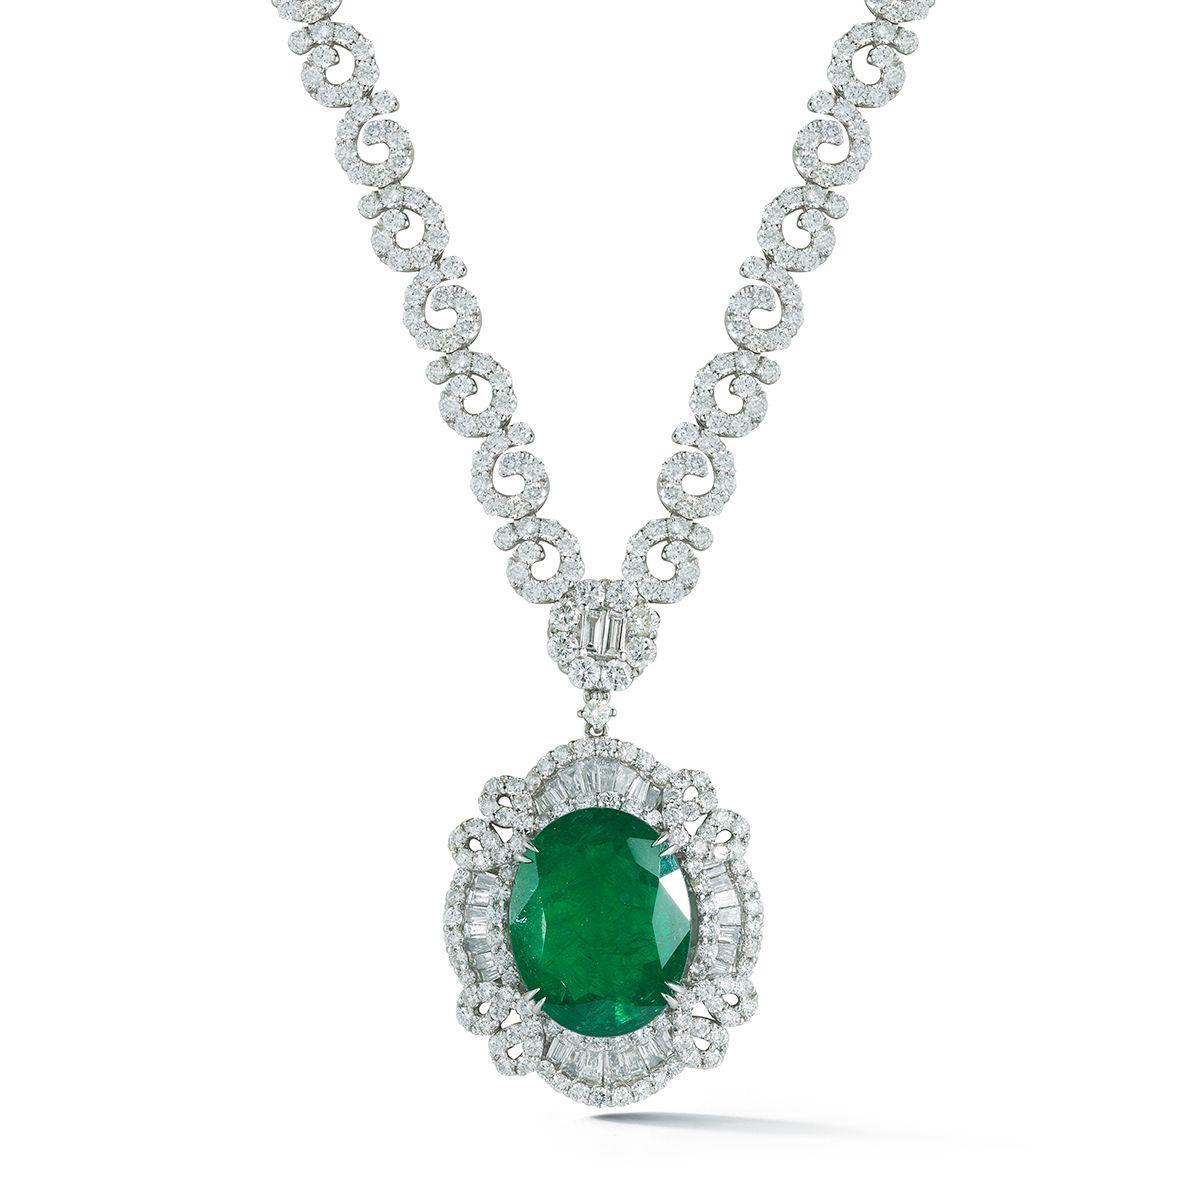 EMERALD AND DIAMOND
NECKLACE
Beautiful lace-like diamond detail enhances a rich green oval emerald.
Item: # 02666
Metal: 18k W
Color Weight: 8.91 ct.
Diamond Weight: 11.71 ct.